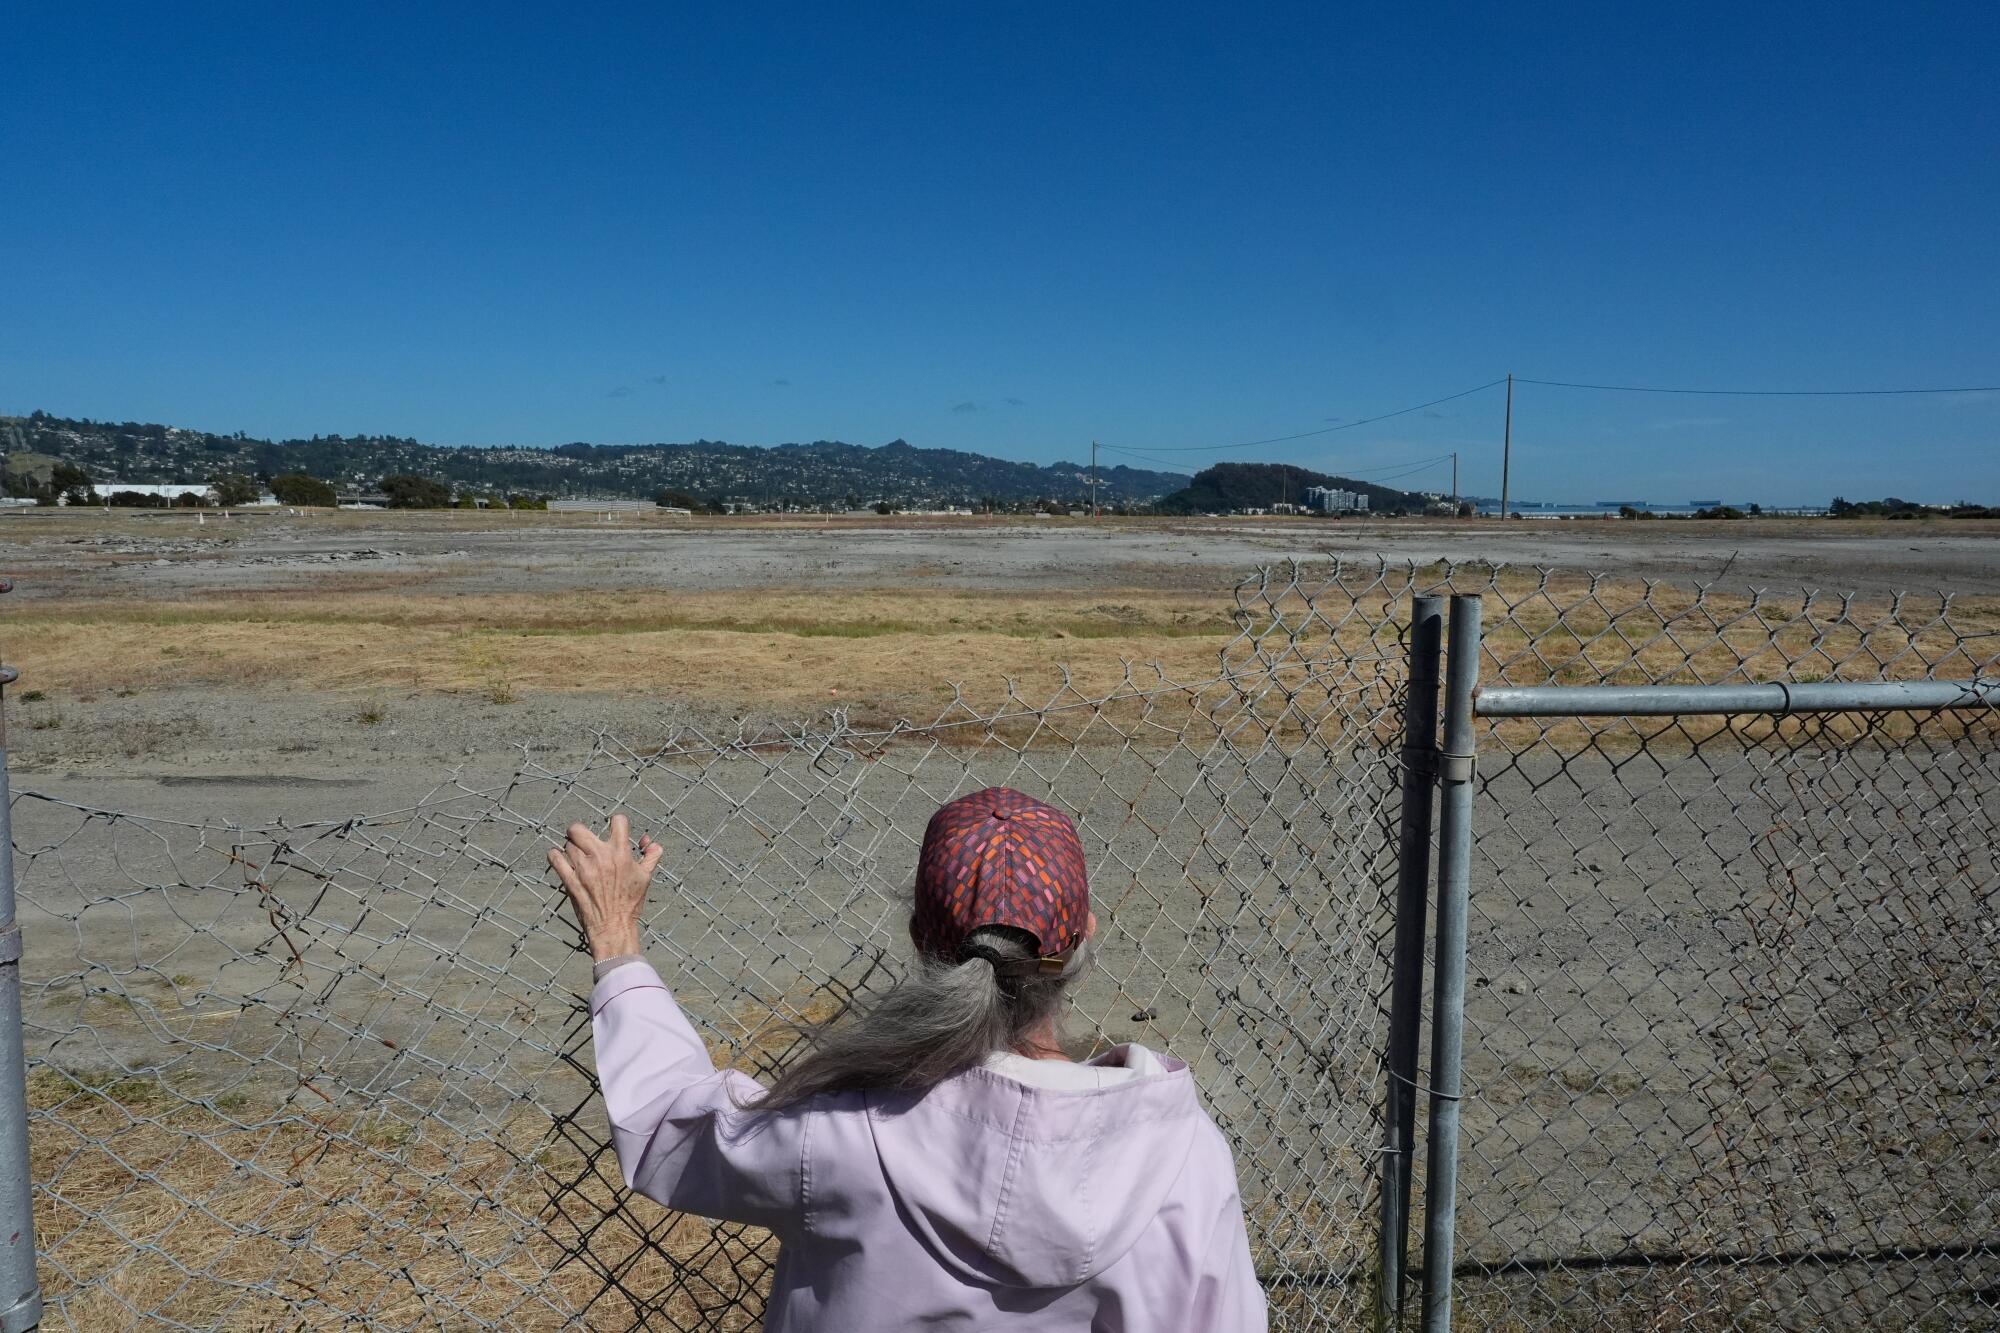 A woman looks at a field through a chain-link fence.